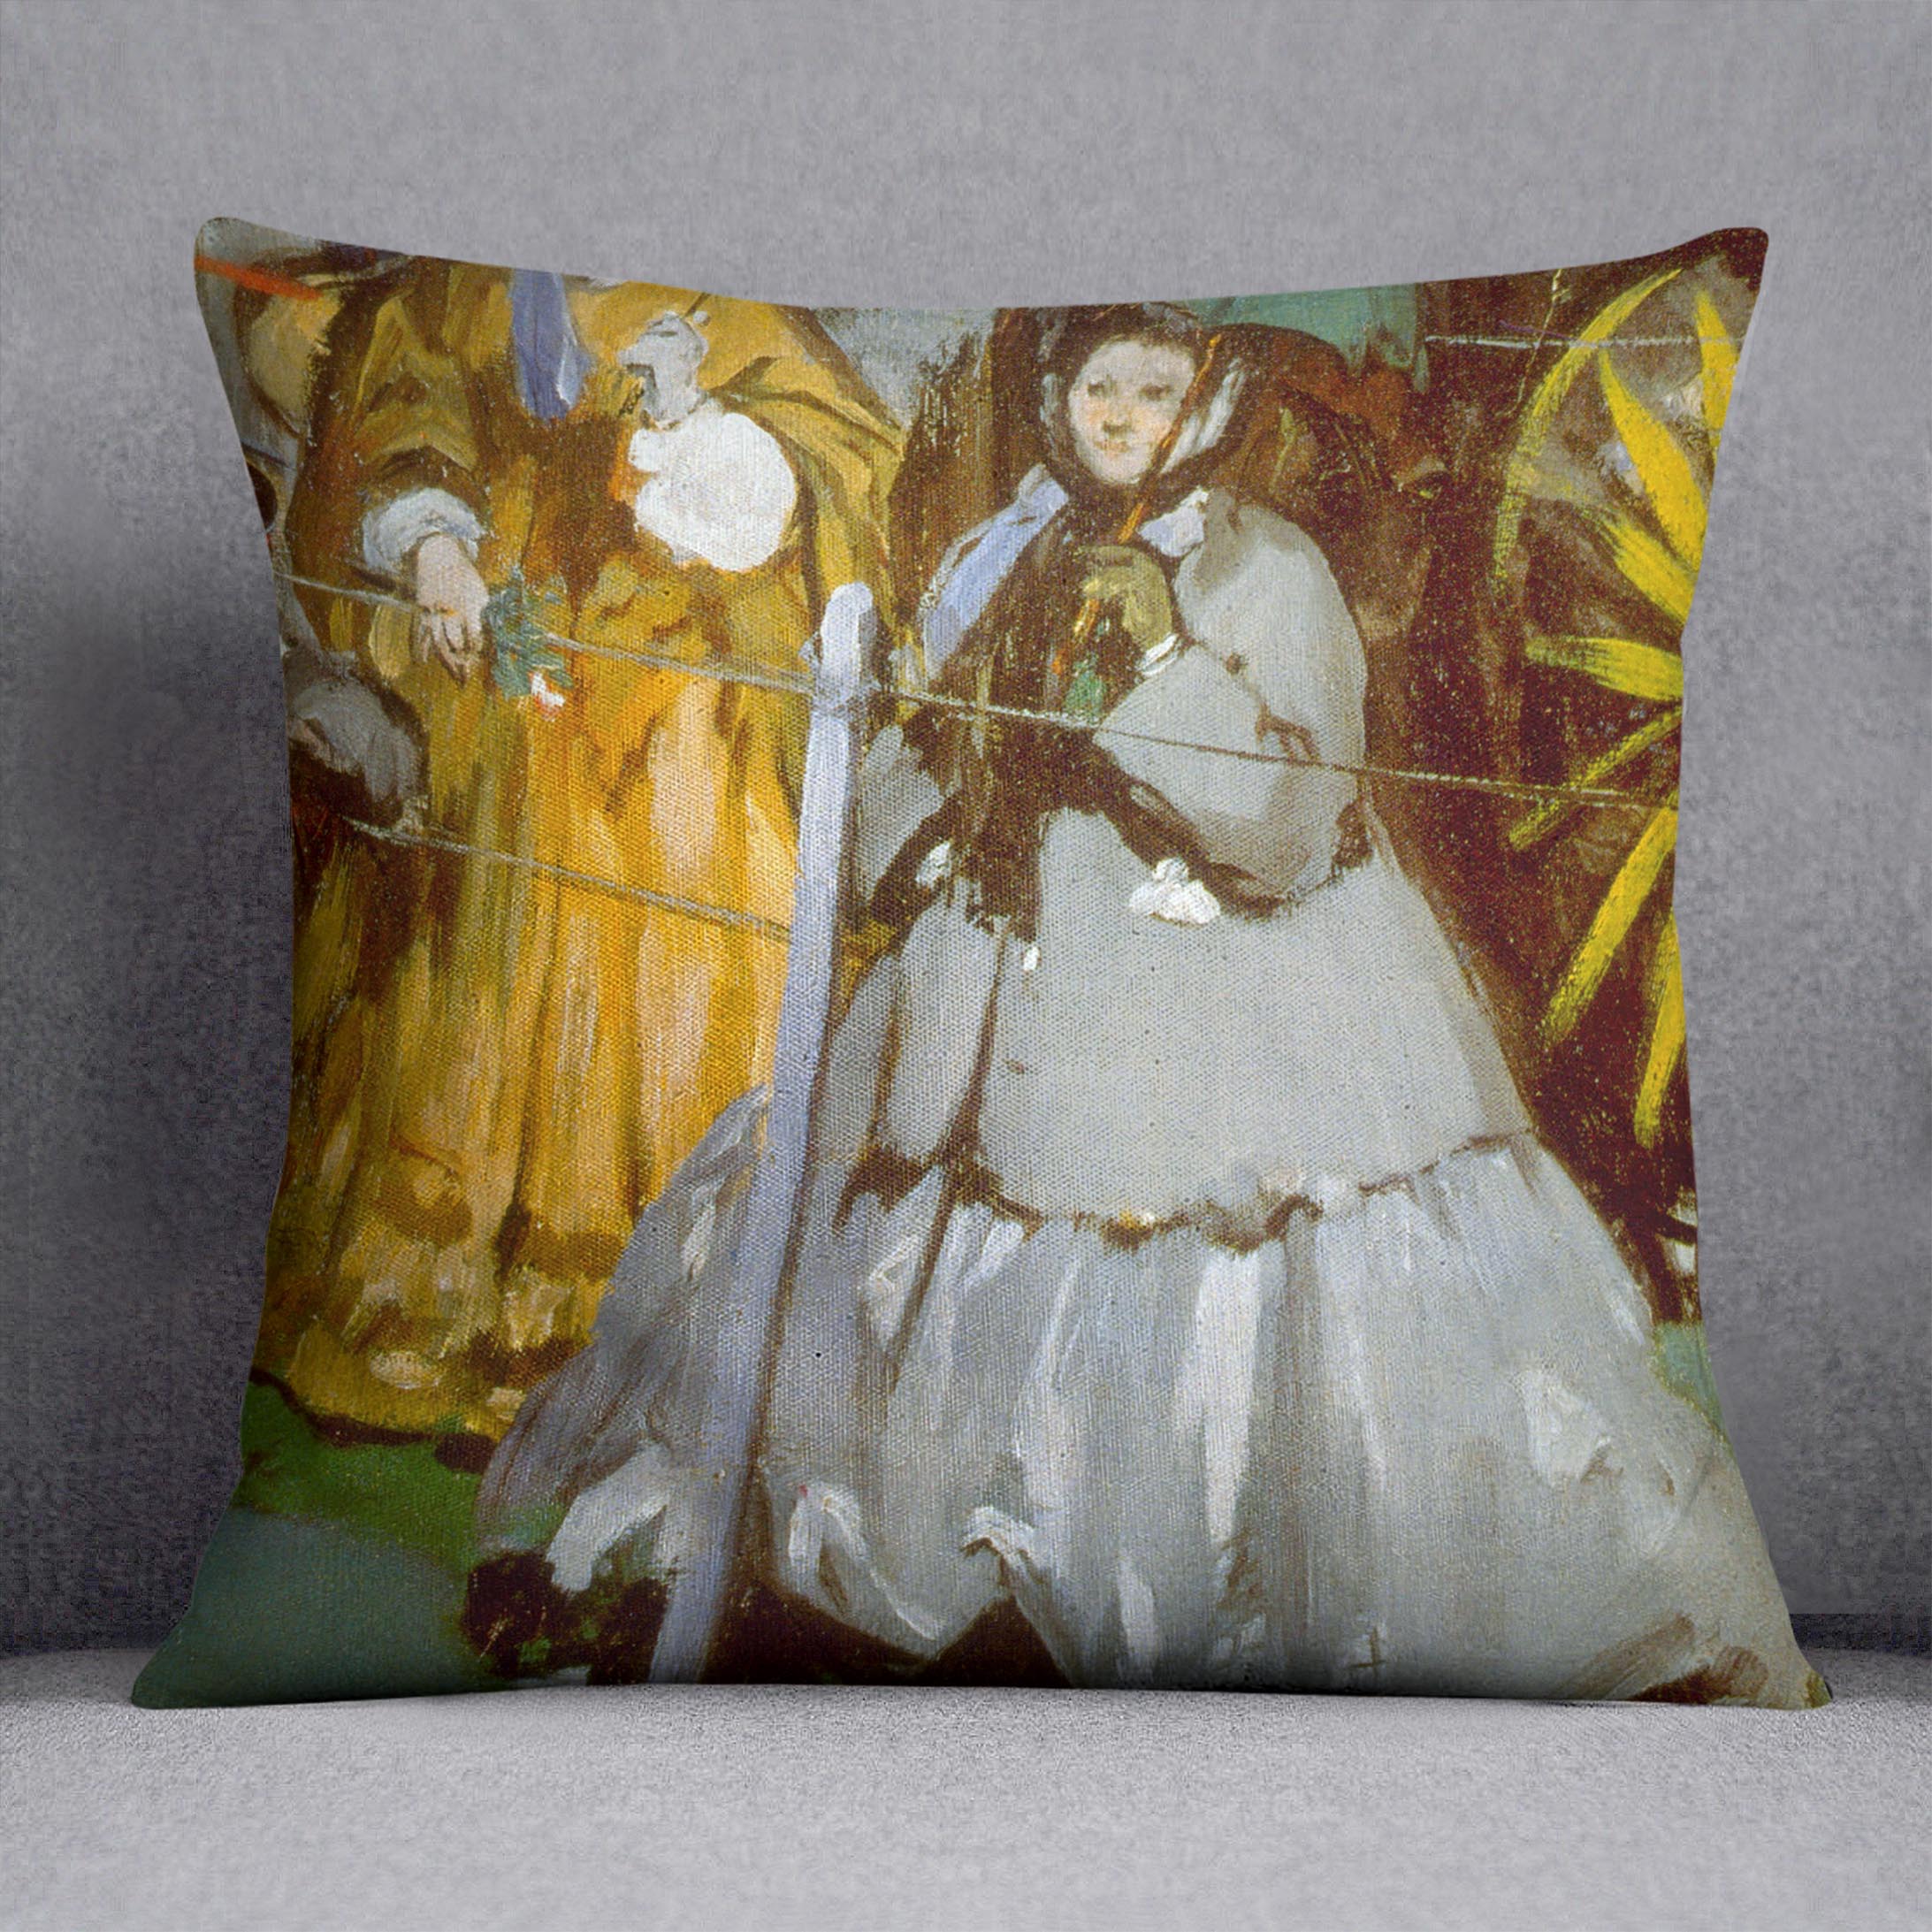 Racecourse by Manet Cushion